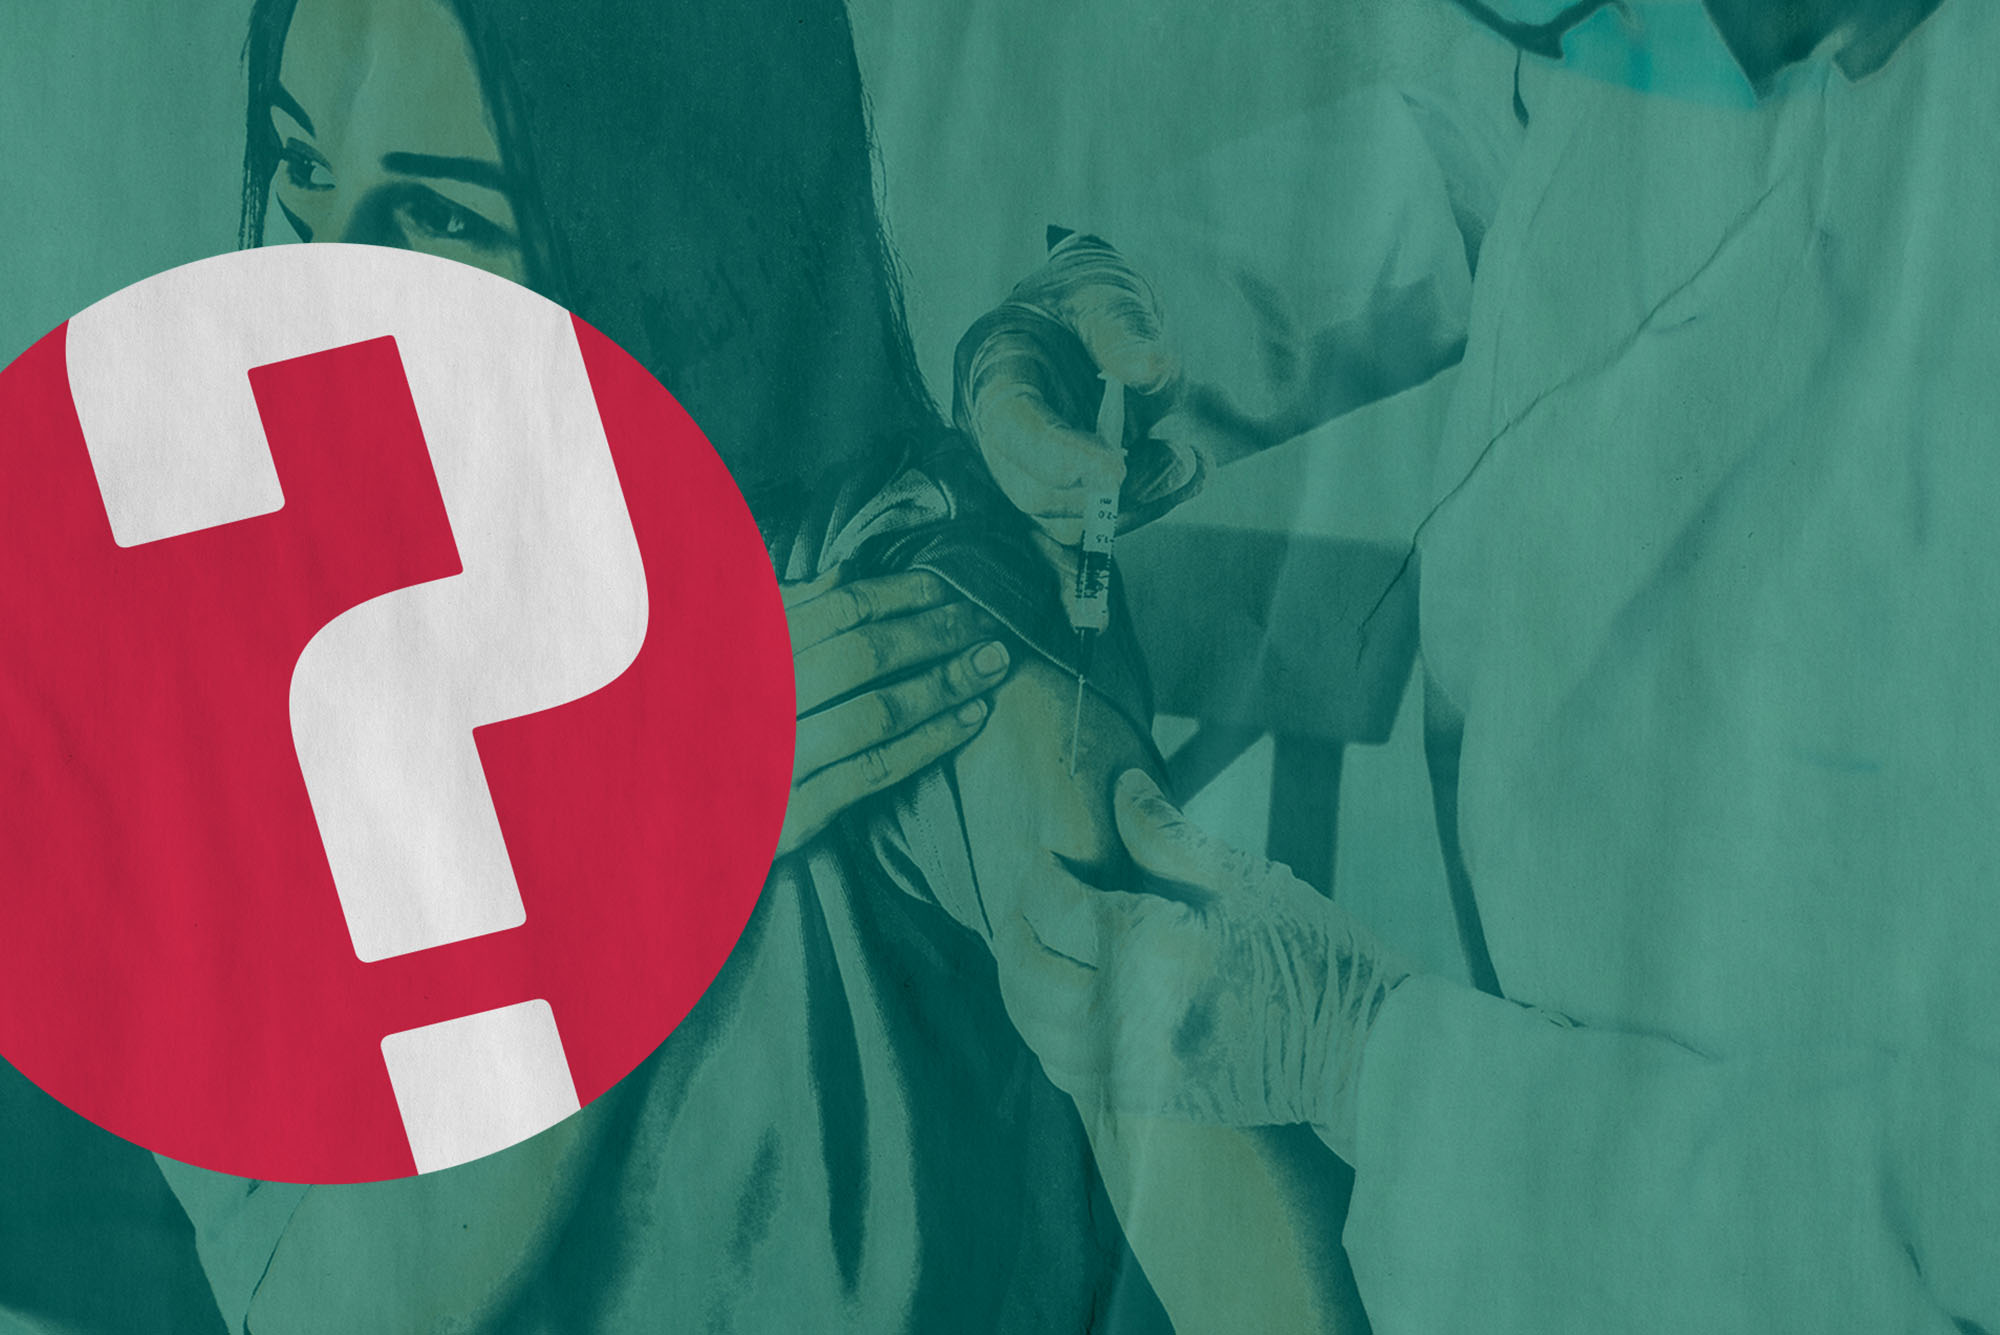 Photo of a young woman with a face mask and brown hair getting vaccinated. The doctor wears a white jacket, gloves and a face mask. An effect is applied to the image that makes it look like it was poorly printed on teal paper. Red Question of the week logo is overlaid.